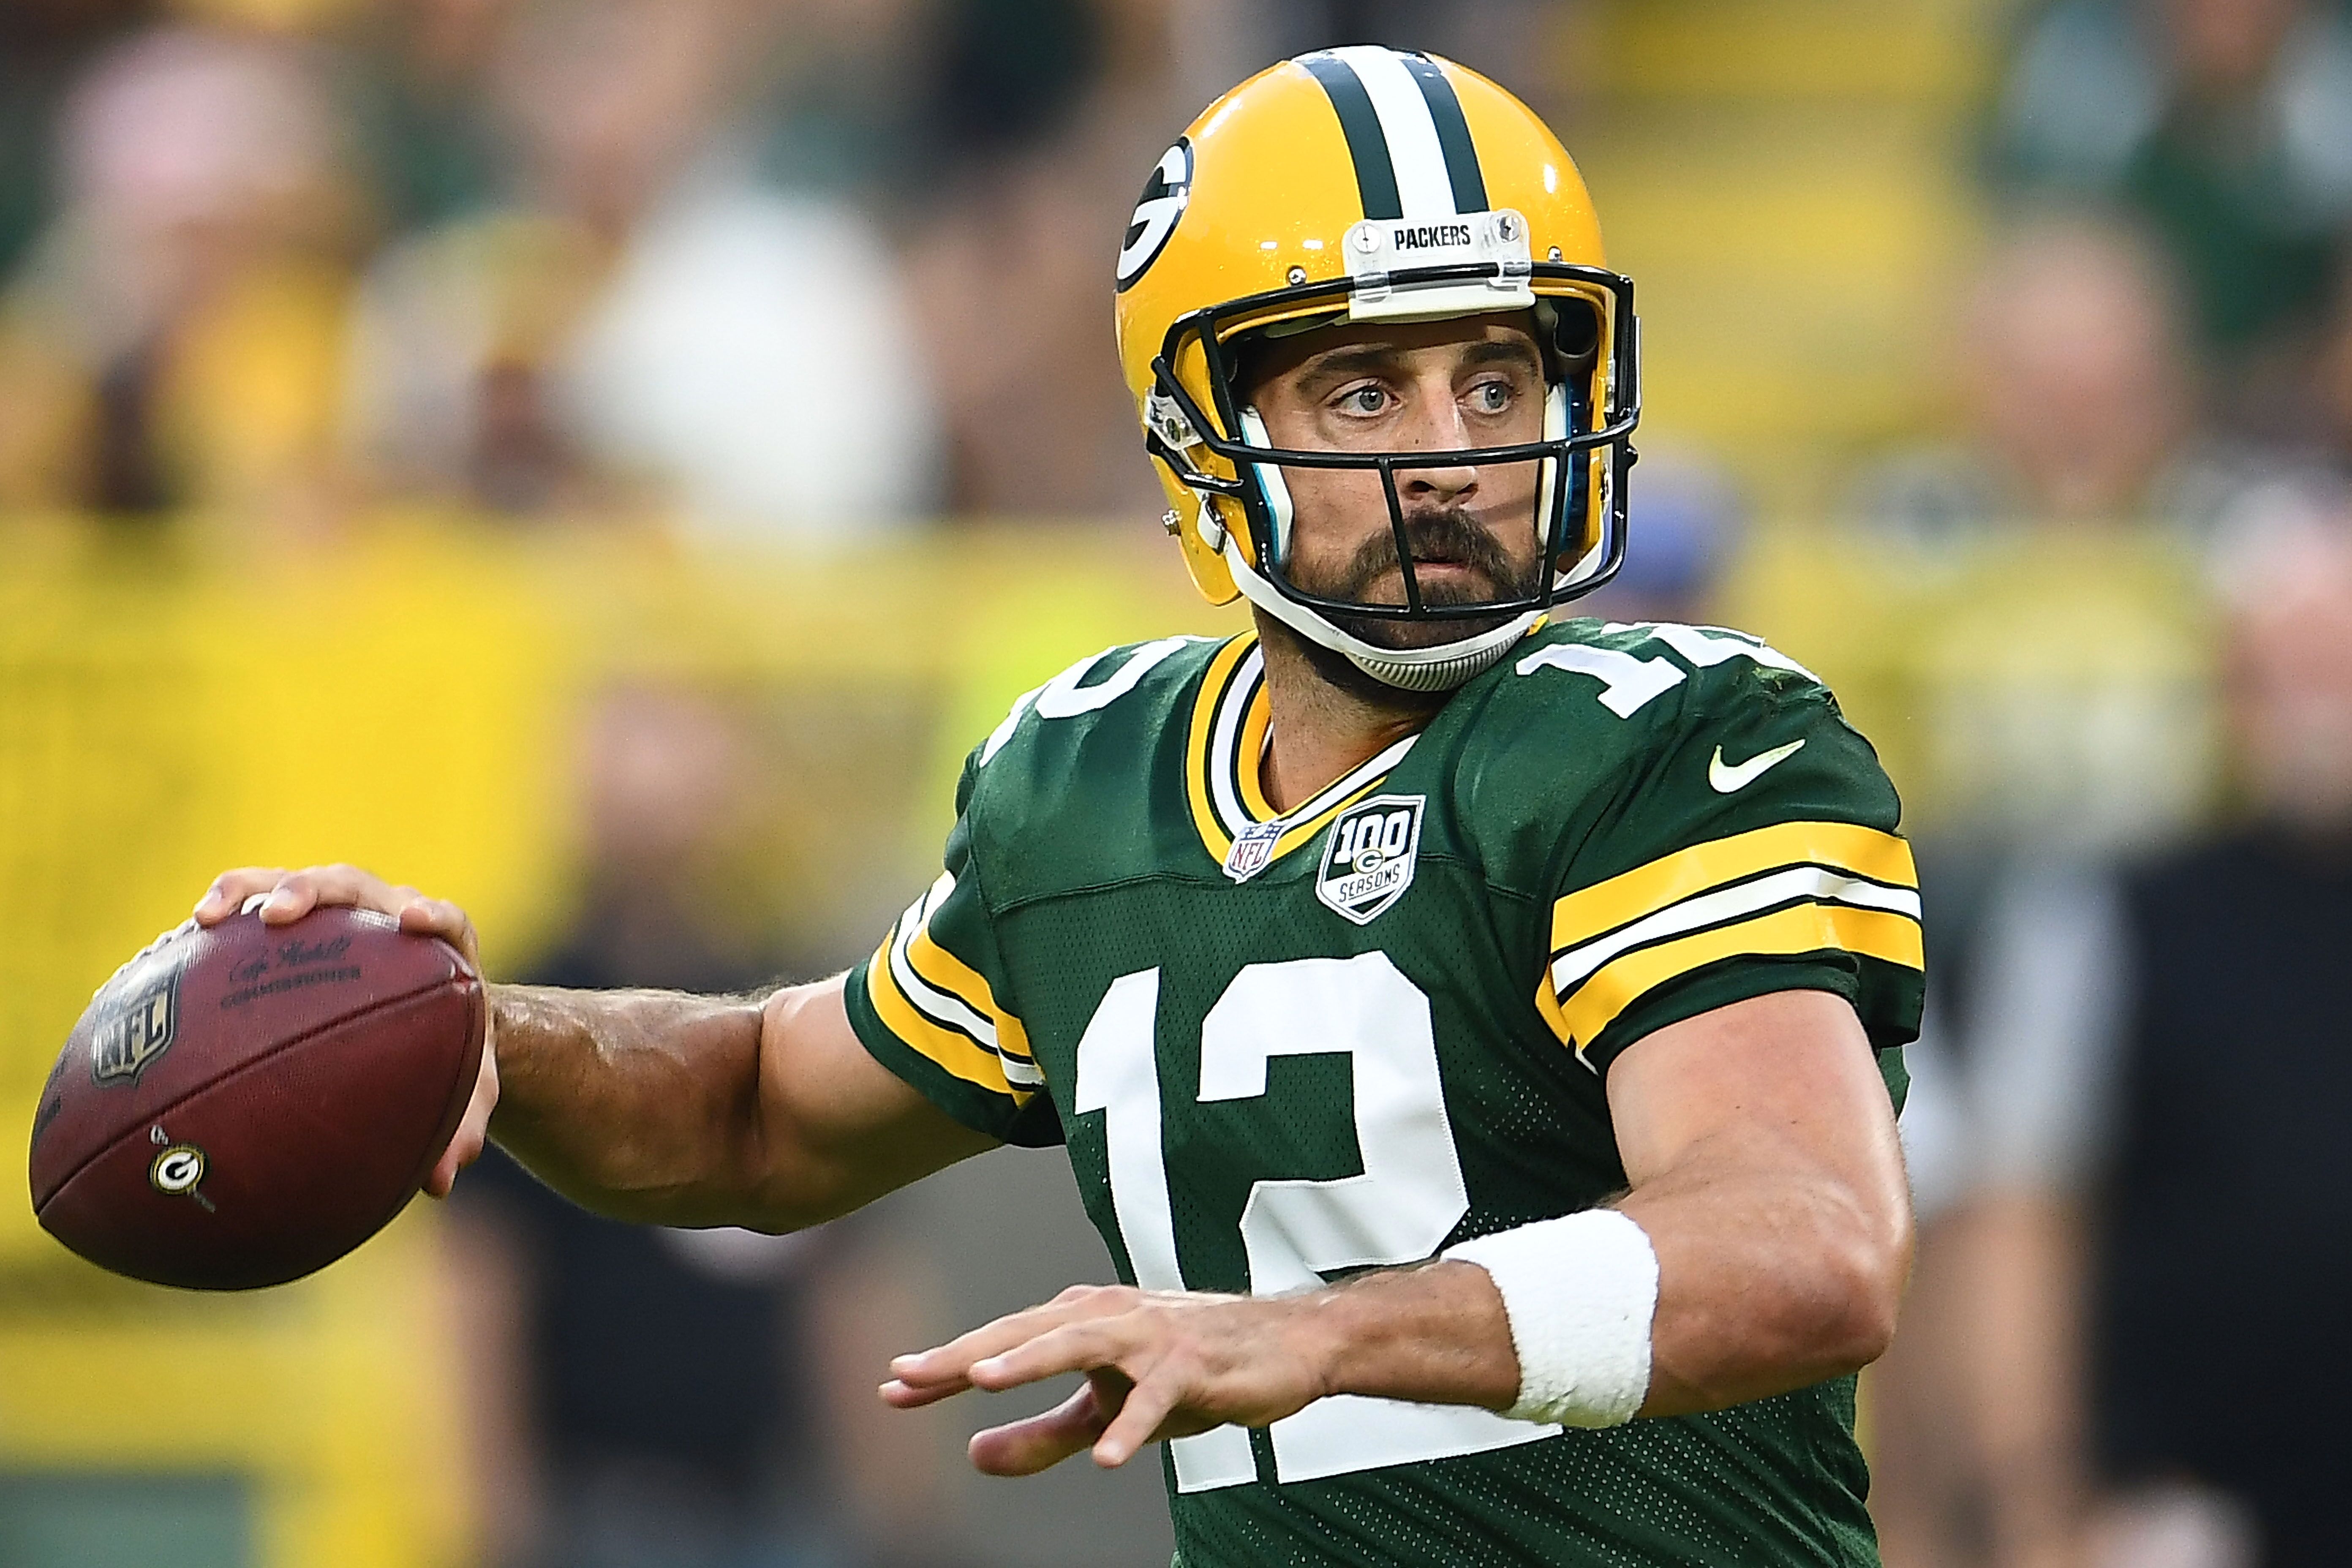 Aaron Rodgers #12 of the Green Bay Packers drops back to pass during a preseason game against the Pittsburgh Steelers at Lambeau Field on August 16, 2018 in Green Bay, Wisconsin. | Source: Getty Images